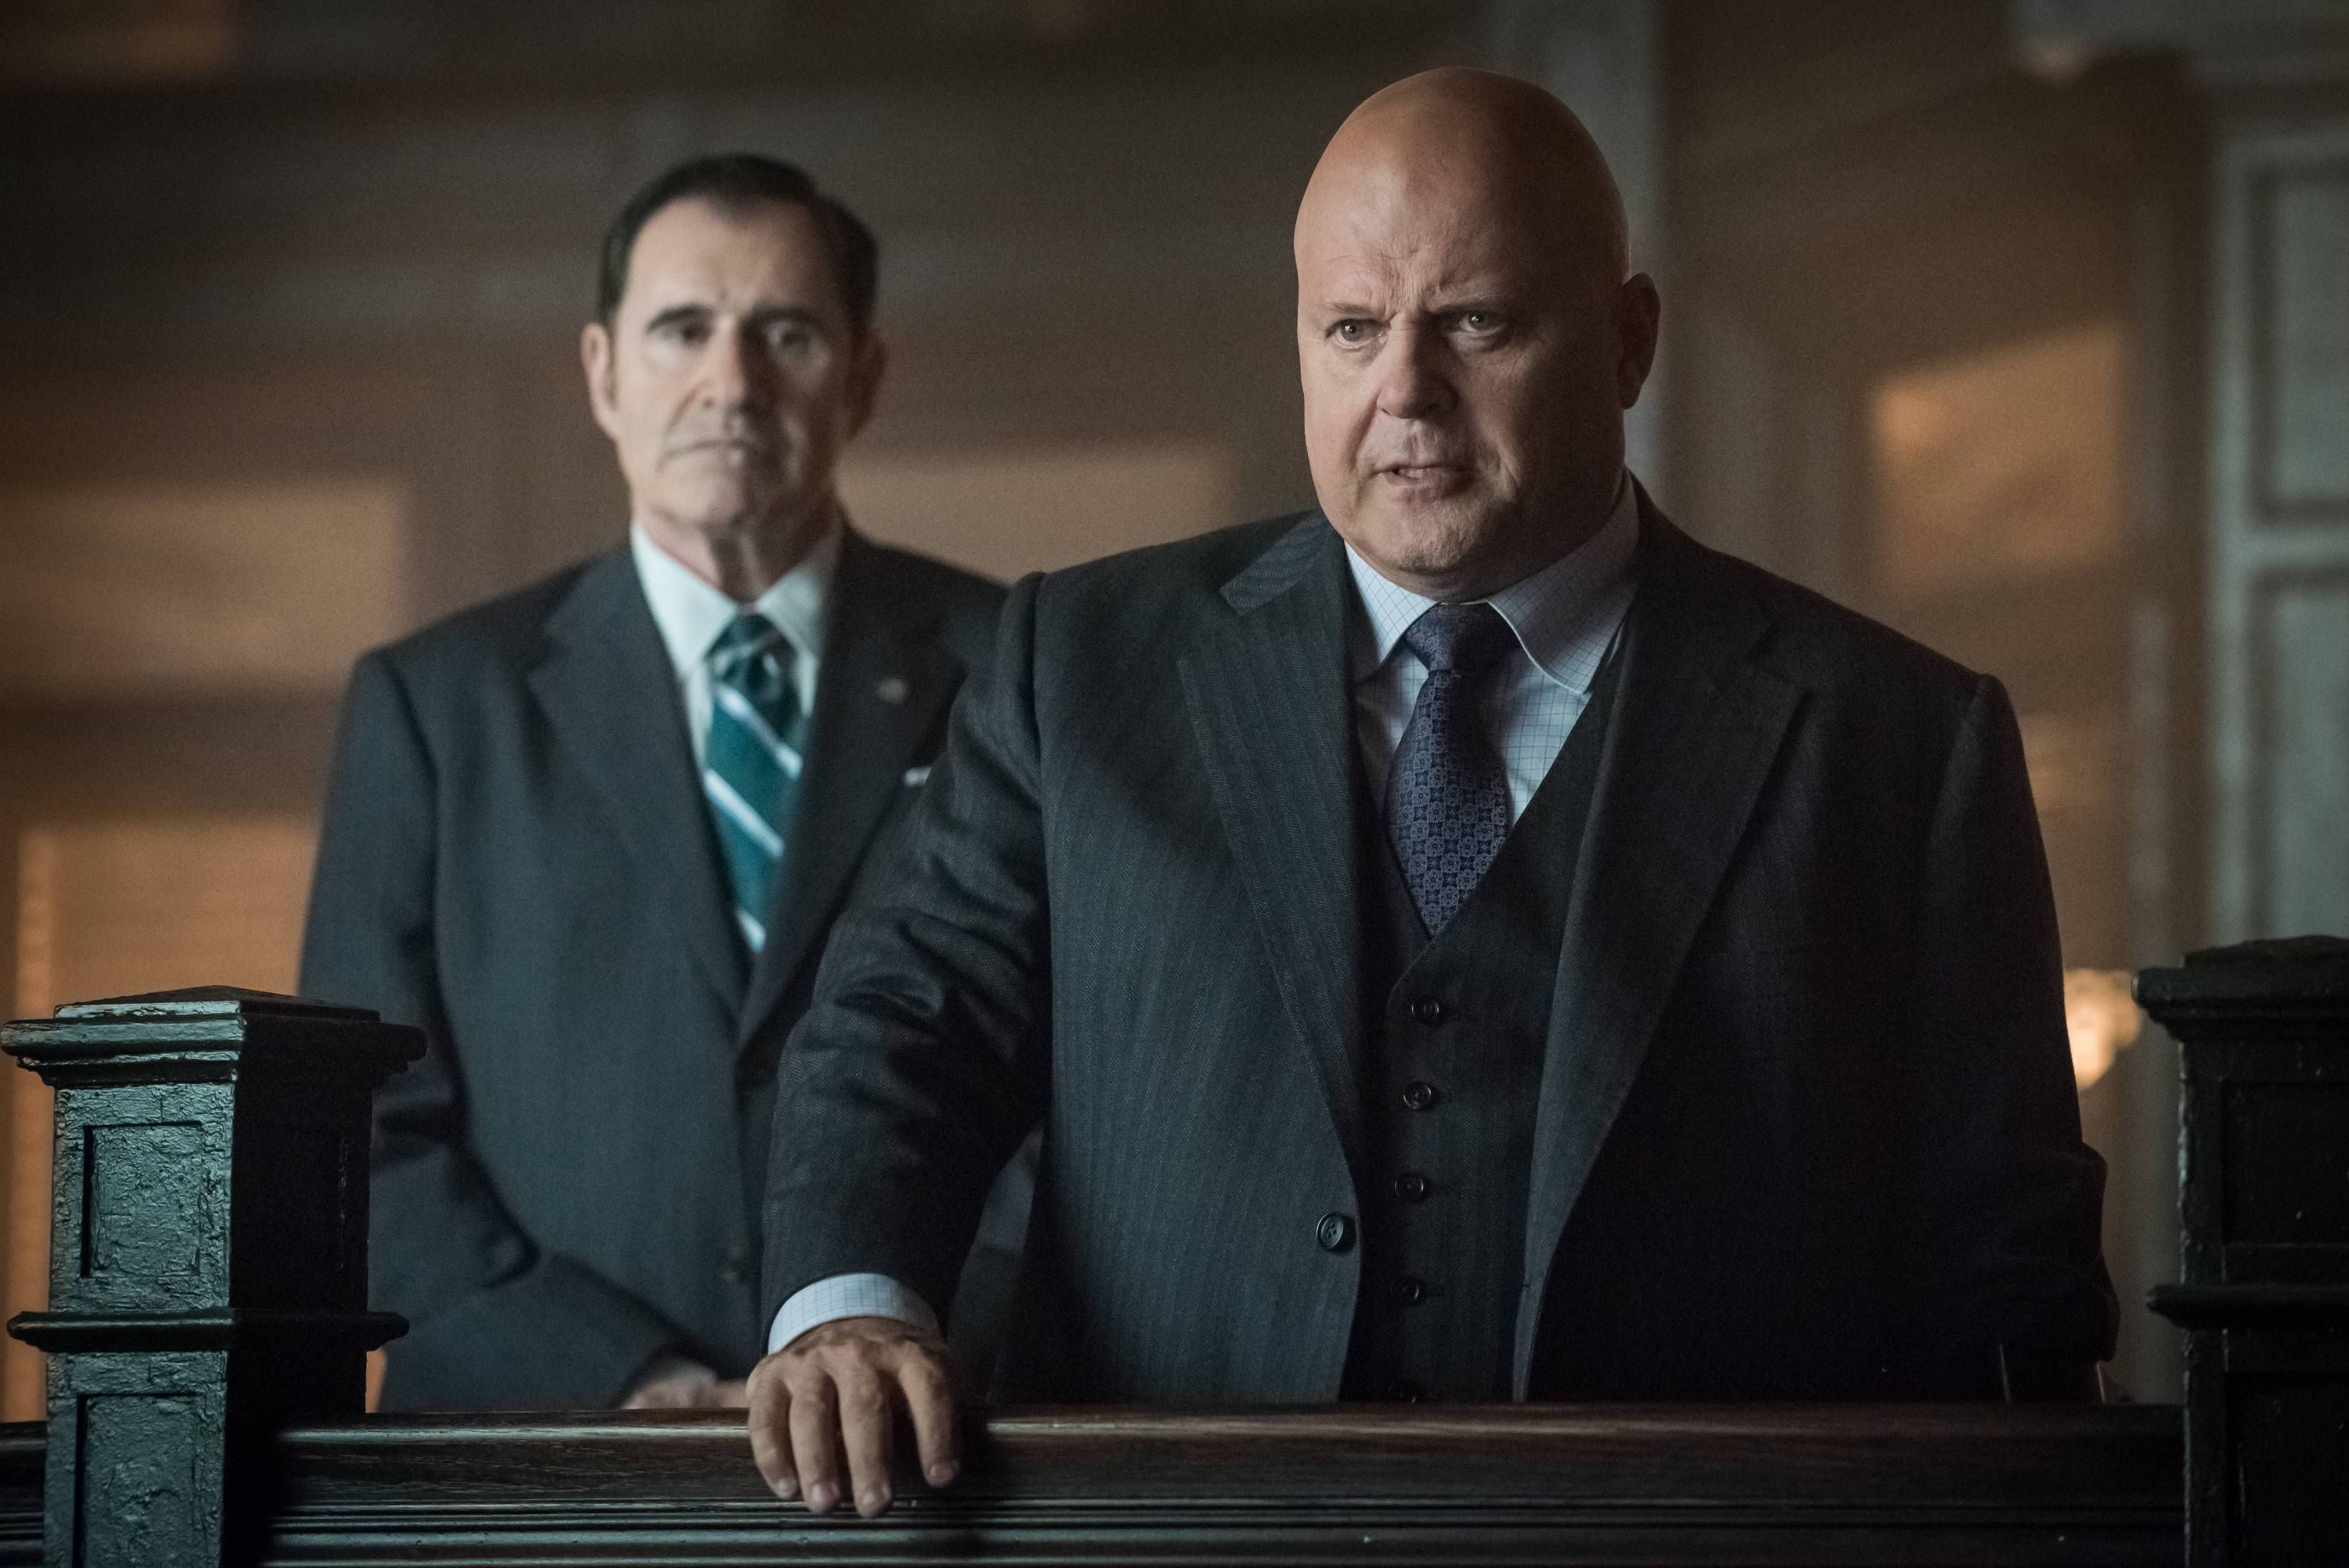 GOTHAM: L-R: Guest star Richard Kind and Michael Chiklis in the ÒMad City: Better to Reign in HellÉÓ season premiere episode of GOTHAM airing airing Monday, Sept. 19 (8:00-9:01 PM ET/PT) on FOX. ©2015 Fox Broadcasting Co. Cr: Jeff Neumann/FOX.